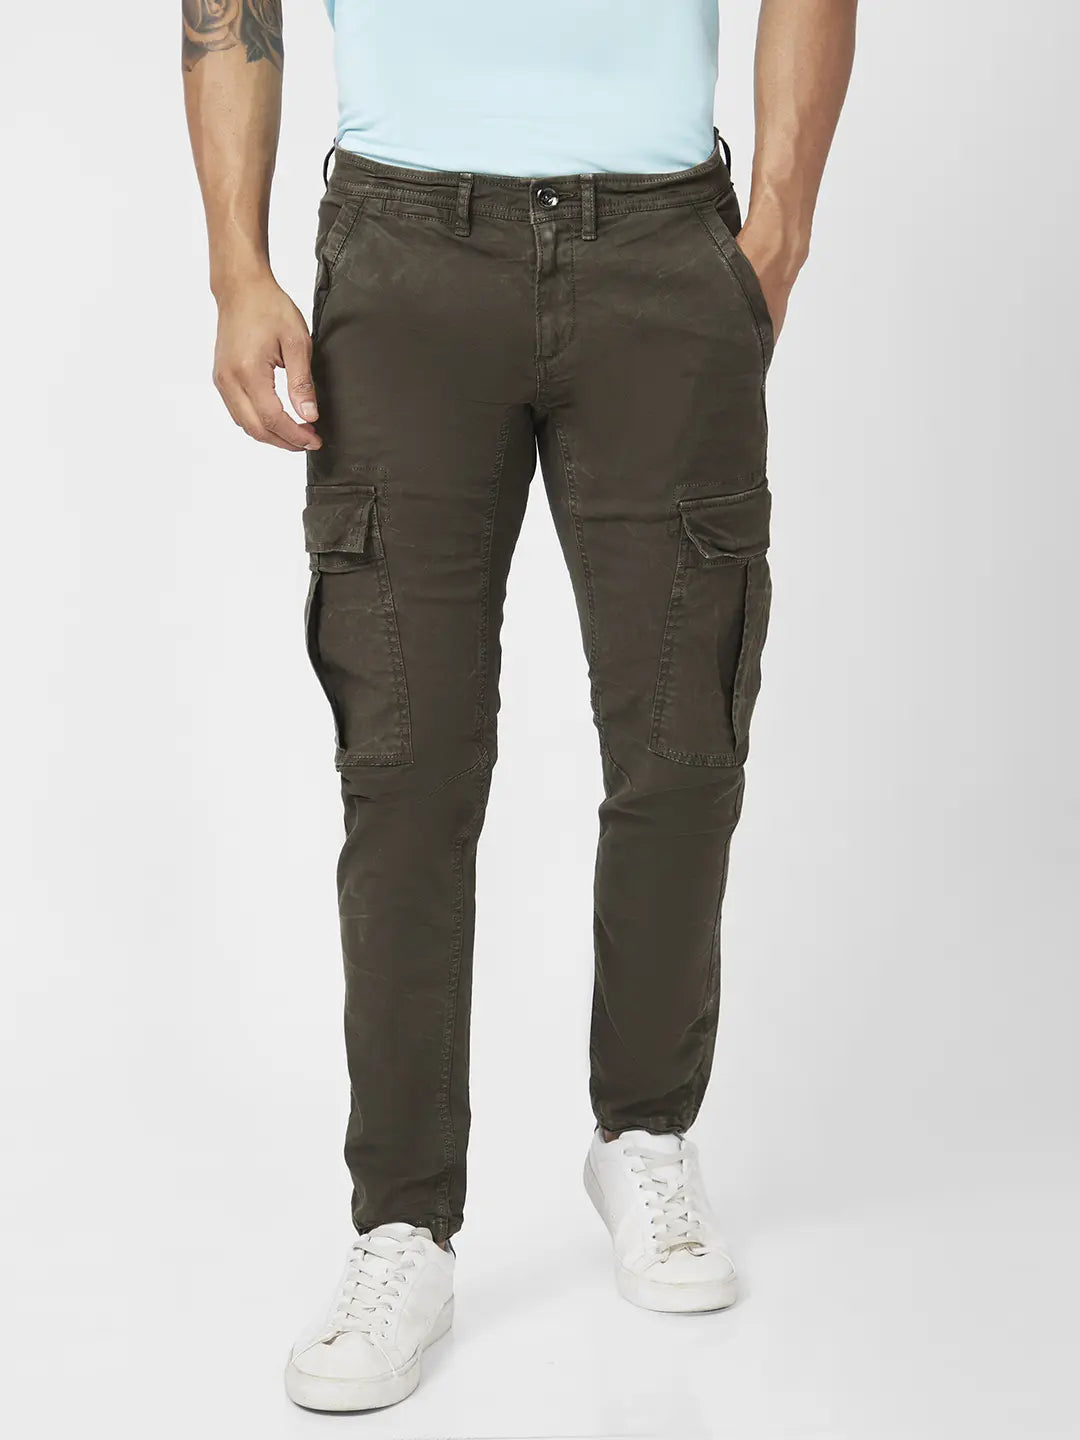 Stylish and Comfortable Men's Olive Green Cargo Pants